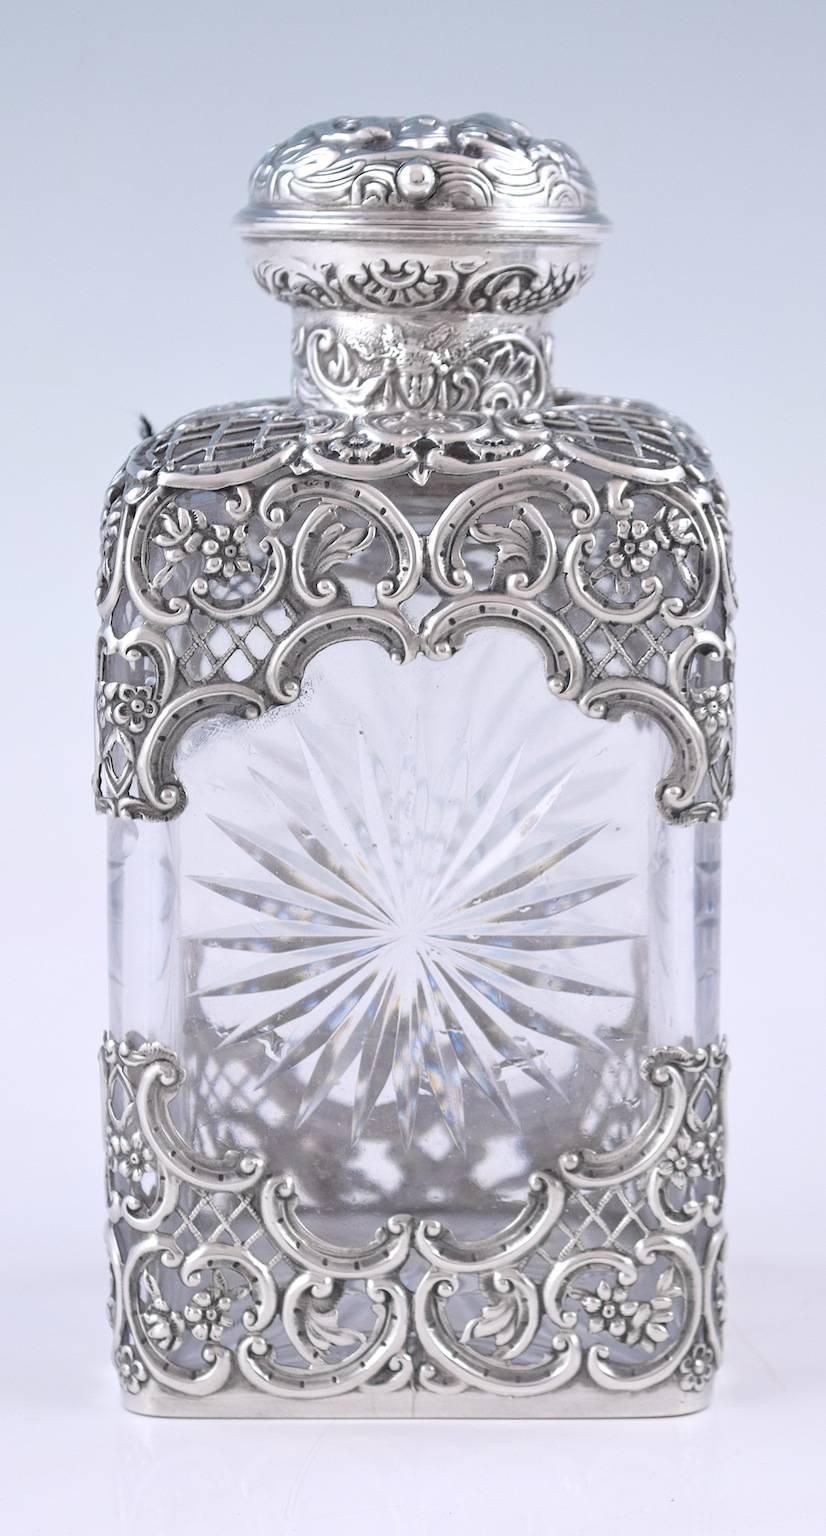 Openwork silver-mounts on glass, characteristic of the maker.
All sterling silver mounts hallmarked for William Comyns, London 1902, 1903 & 1904.
Each bottle with glass stopper.

The largest, 20 cm high and 9 cm square at the base.
The middle